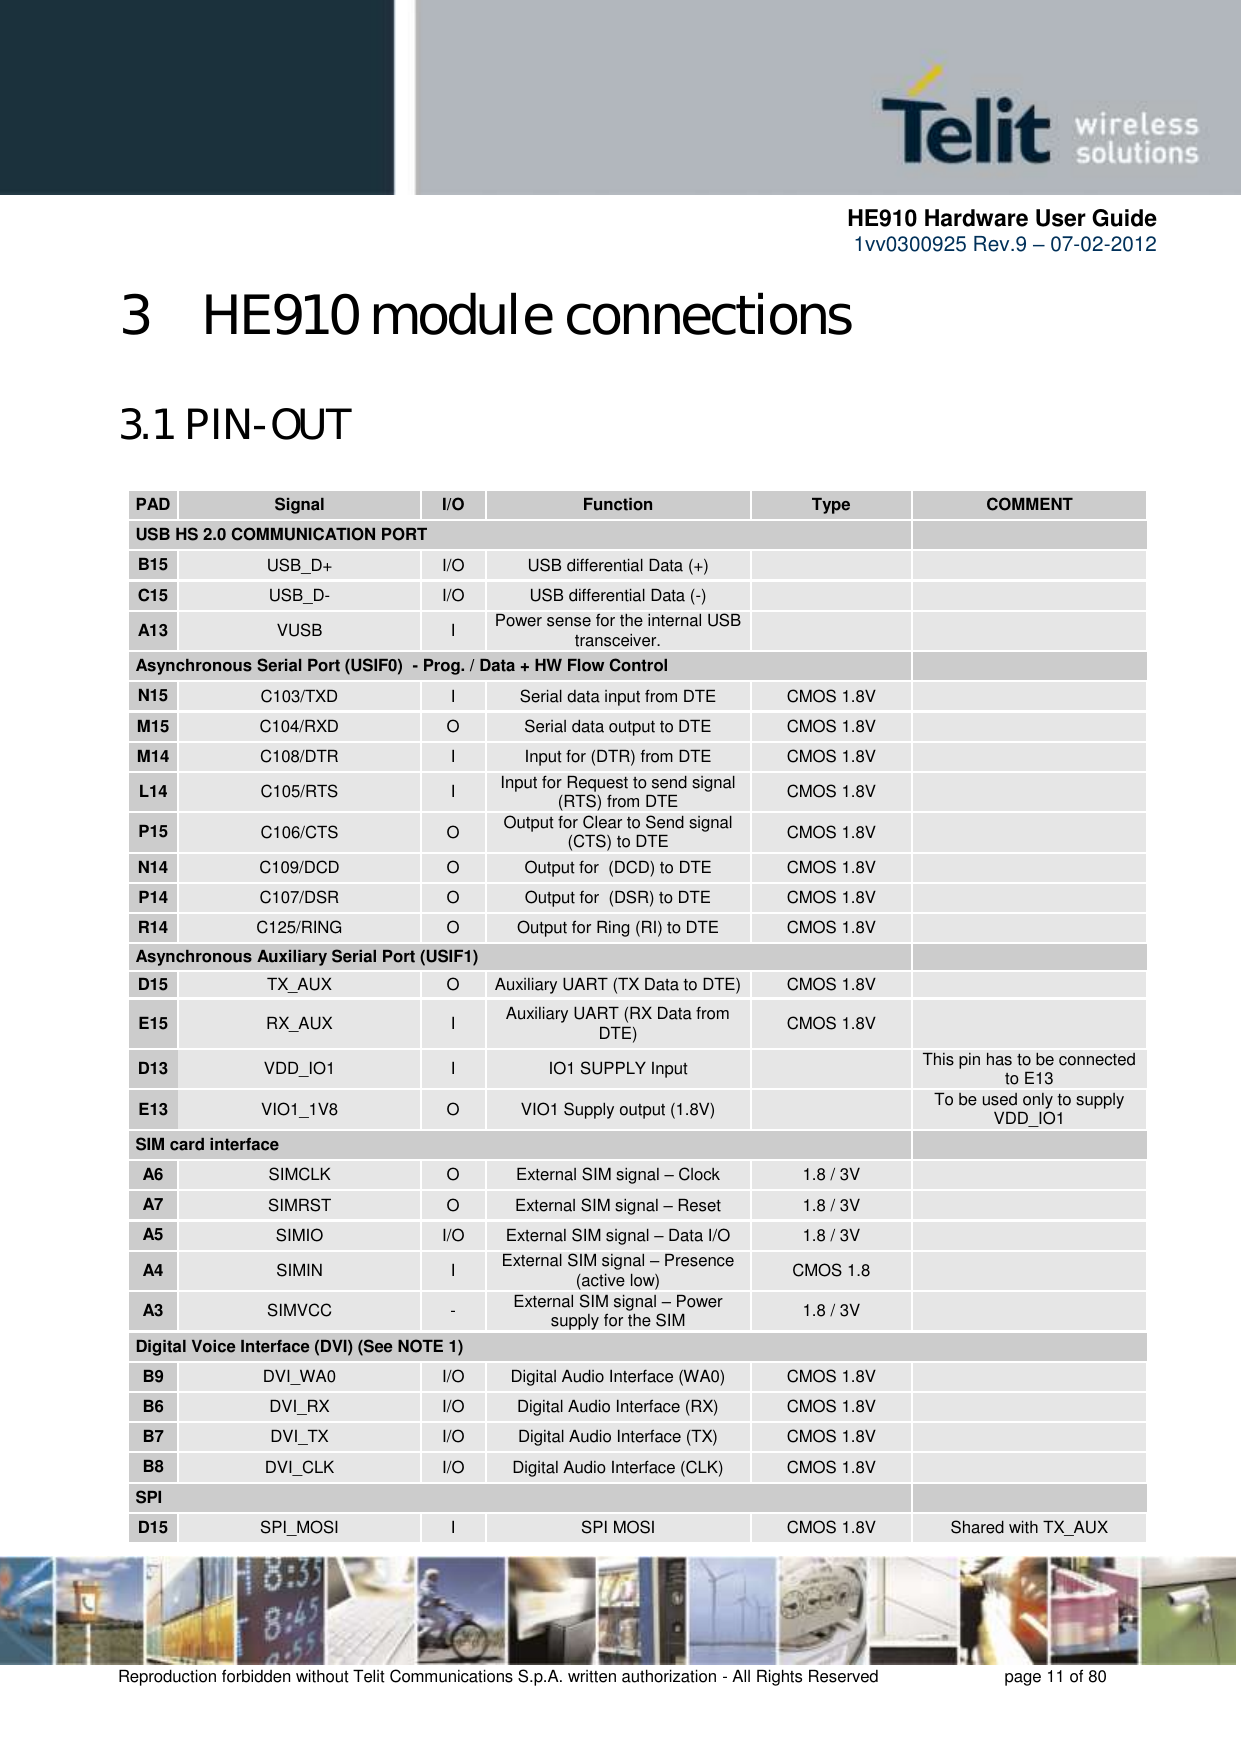      HE910 Hardware User Guide 1vv0300925 Rev.9 – 07-02-2012    Reproduction forbidden without Telit Communications S.p.A. written authorization - All Rights Reserved    page 11 of 80  3 HE910 module connections  3.1 PIN-OUT PAD Signal I/O Function Type COMMENT USB HS 2.0 COMMUNICATION PORT    B15 USB_D+ I/O USB differential Data (+)   C15 USB_D- I/O USB differential Data (-)   A13 VUSB I Power sense for the internal USB transceiver.   Asynchronous Serial Port (USIF0)  - Prog. / Data + HW Flow Control   N15 C103/TXD I Serial data input from DTE CMOS 1.8V  M15 C104/RXD O Serial data output to DTE CMOS 1.8V  M14 C108/DTR I Input for (DTR) from DTE CMOS 1.8V  L14 C105/RTS I Input for Request to send signal (RTS) from DTE CMOS 1.8V  P15 C106/CTS O Output for Clear to Send signal (CTS) to DTE CMOS 1.8V  N14 C109/DCD O Output for  (DCD) to DTE CMOS 1.8V  P14 C107/DSR O Output for  (DSR) to DTE CMOS 1.8V  R14 C125/RING O Output for Ring (RI) to DTE CMOS 1.8V  Asynchronous Auxiliary Serial Port (USIF1)    D15 TX_AUX O Auxiliary UART (TX Data to DTE) CMOS 1.8V  E15 RX_AUX I Auxiliary UART (RX Data from DTE) CMOS 1.8V  D13 VDD_IO1 I IO1 SUPPLY Input  This pin has to be connected to E13 E13 VIO1_1V8 O VIO1 Supply output (1.8V)  To be used only to supply VDD_IO1 SIM card interface     A6 SIMCLK O External SIM signal – Clock 1.8 / 3V  A7 SIMRST O External SIM signal – Reset 1.8 / 3V  A5 SIMIO I/O External SIM signal – Data I/O 1.8 / 3V  A4 SIMIN I External SIM signal – Presence (active low) CMOS 1.8  A3 SIMVCC - External SIM signal – Power supply for the SIM 1.8 / 3V  Digital Voice Interface (DVI) (See NOTE 1) B9 DVI_WA0 I/O Digital Audio Interface (WA0) CMOS 1.8V  B6 DVI_RX I/O Digital Audio Interface (RX) CMOS 1.8V  B7 DVI_TX I/O Digital Audio Interface (TX) CMOS 1.8V  B8 DVI_CLK I/O Digital Audio Interface (CLK) CMOS 1.8V  SPI      D15 SPI_MOSI I SPI MOSI CMOS 1.8V Shared with TX_AUX 